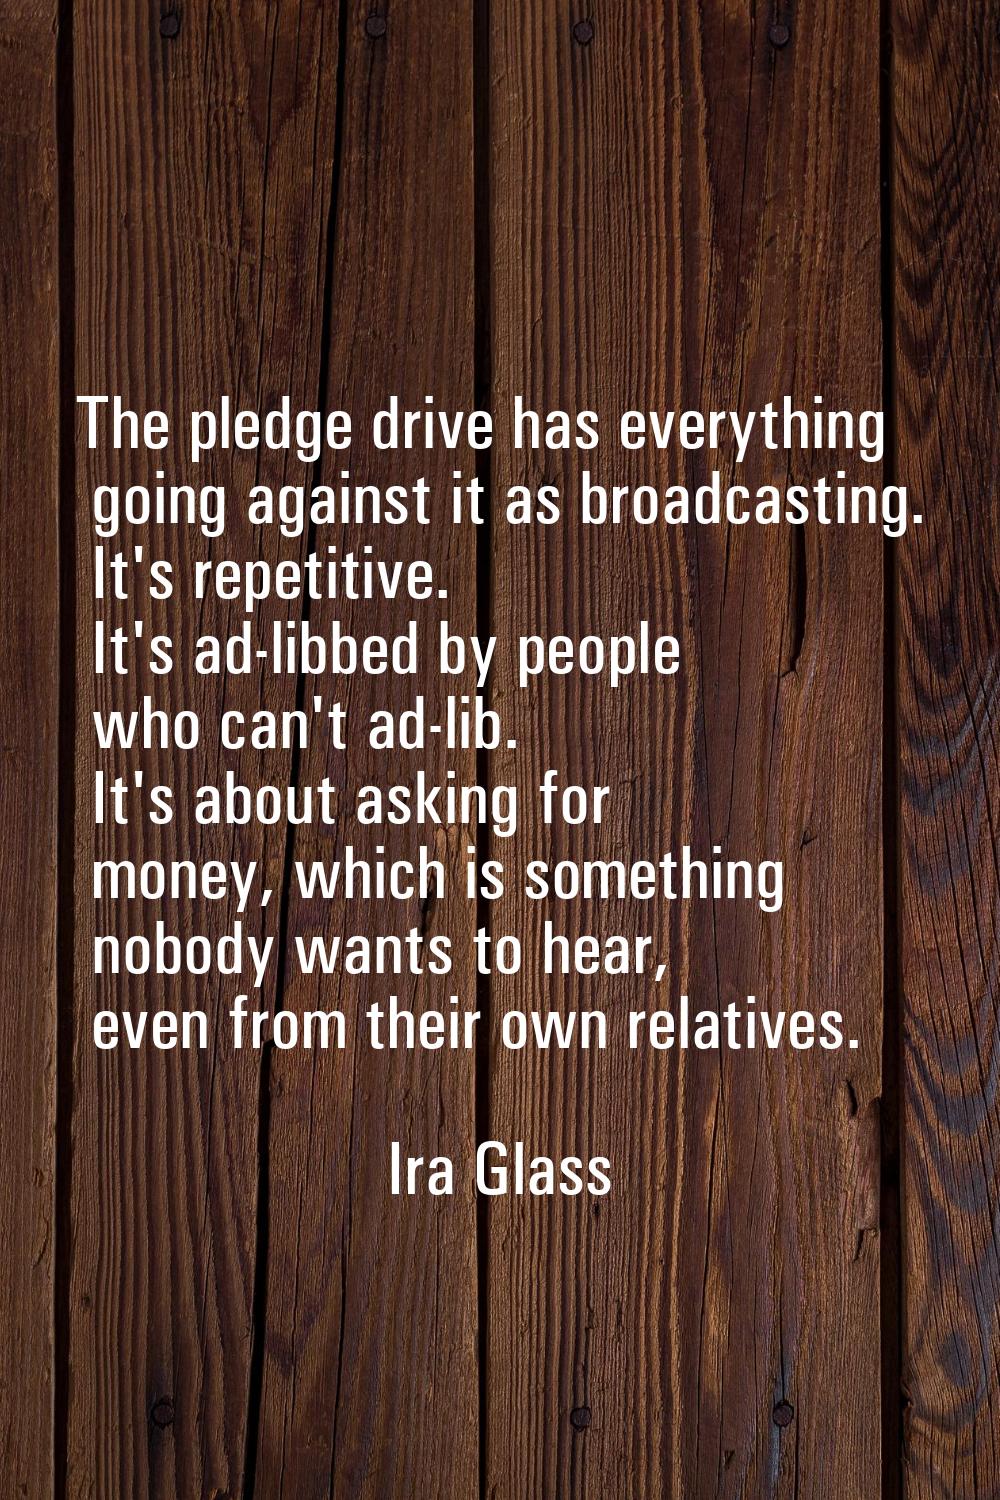 The pledge drive has everything going against it as broadcasting. It's repetitive. It's ad-libbed b